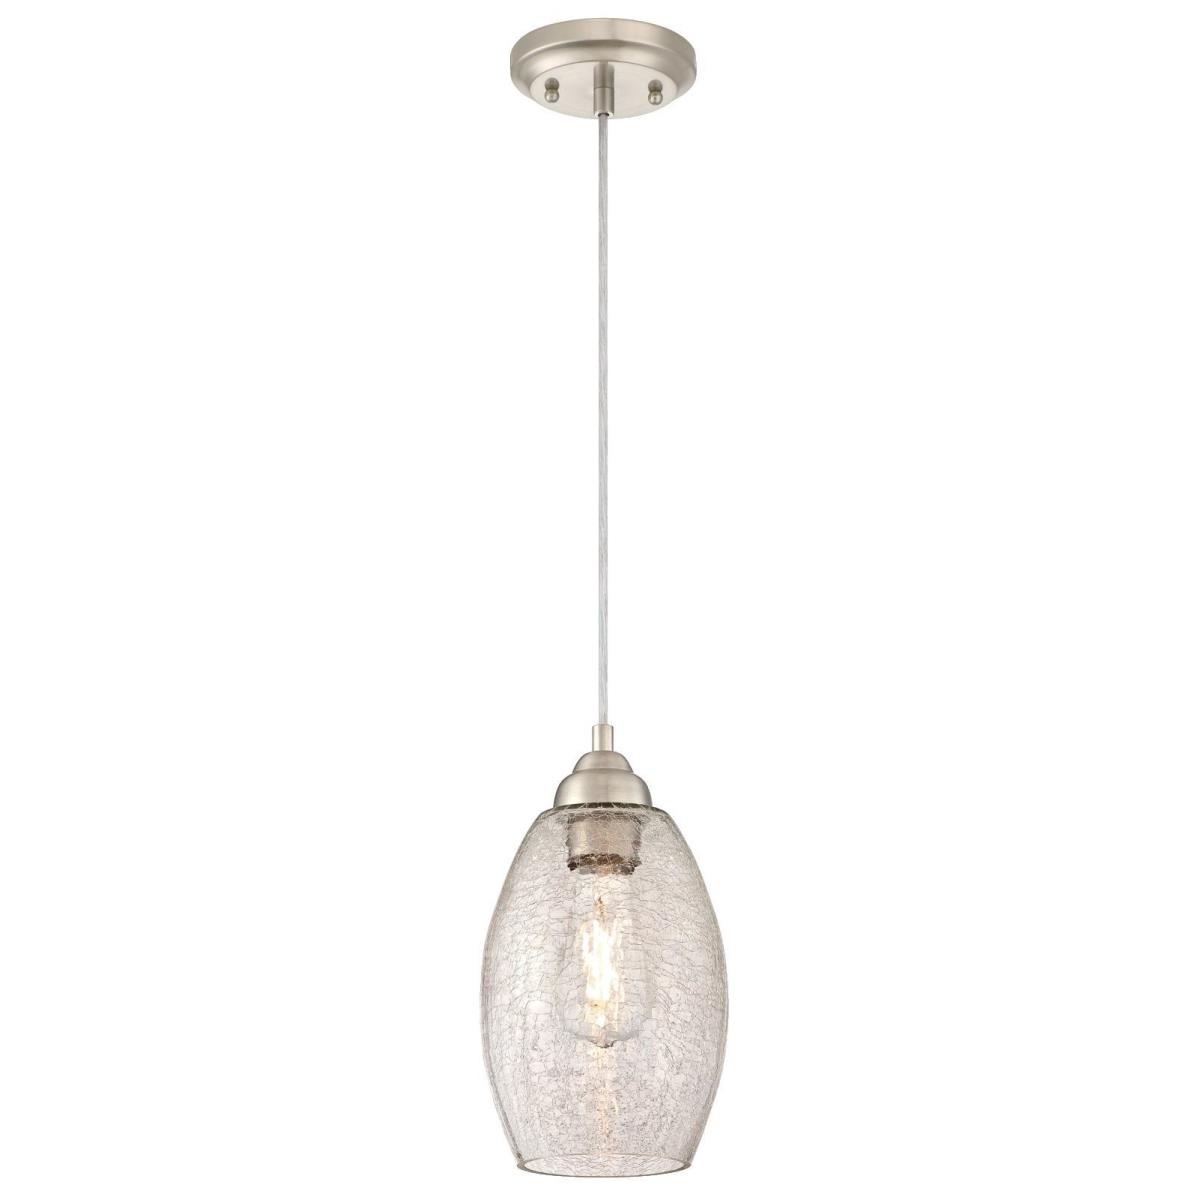 1 Light Mini Pendant Brushed Nickel Finish with Clear Crackle Glass